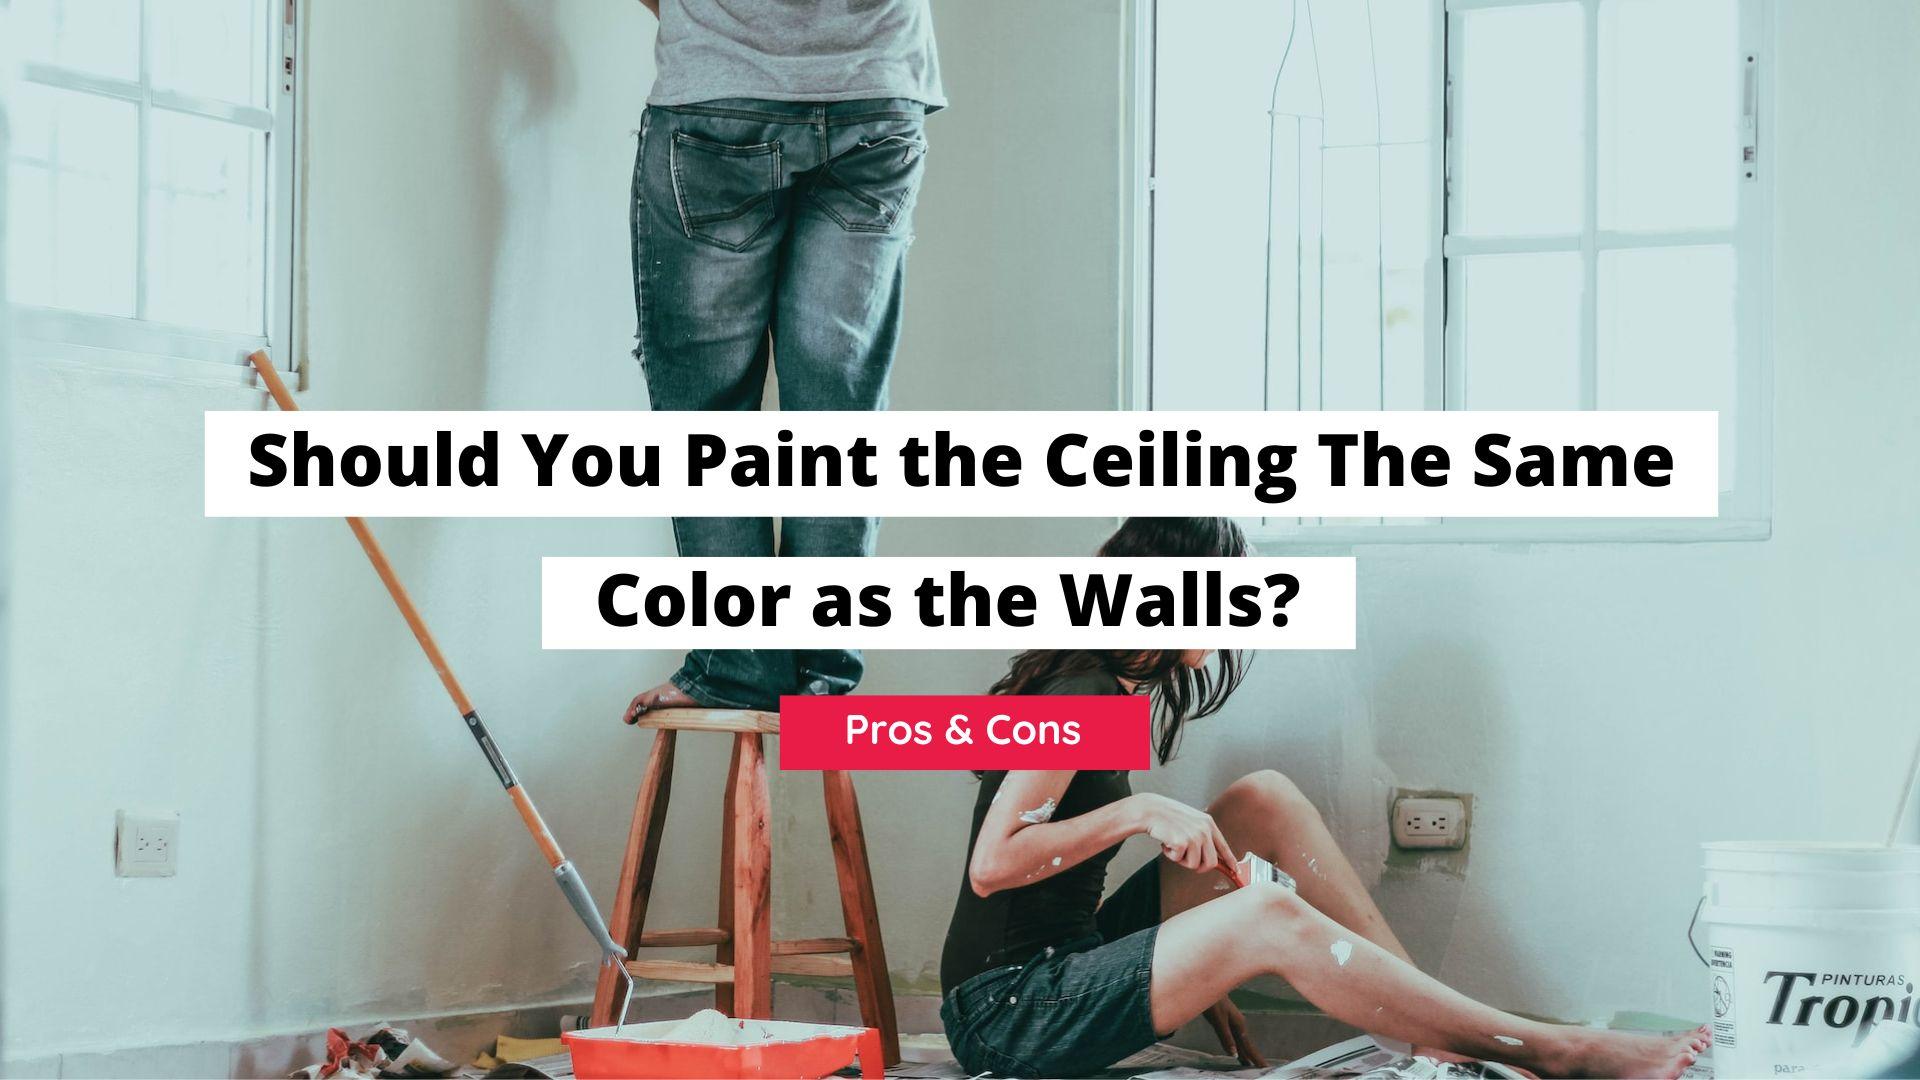 paint ceilings and walls the same color, should you paint walls and ceilings the same color